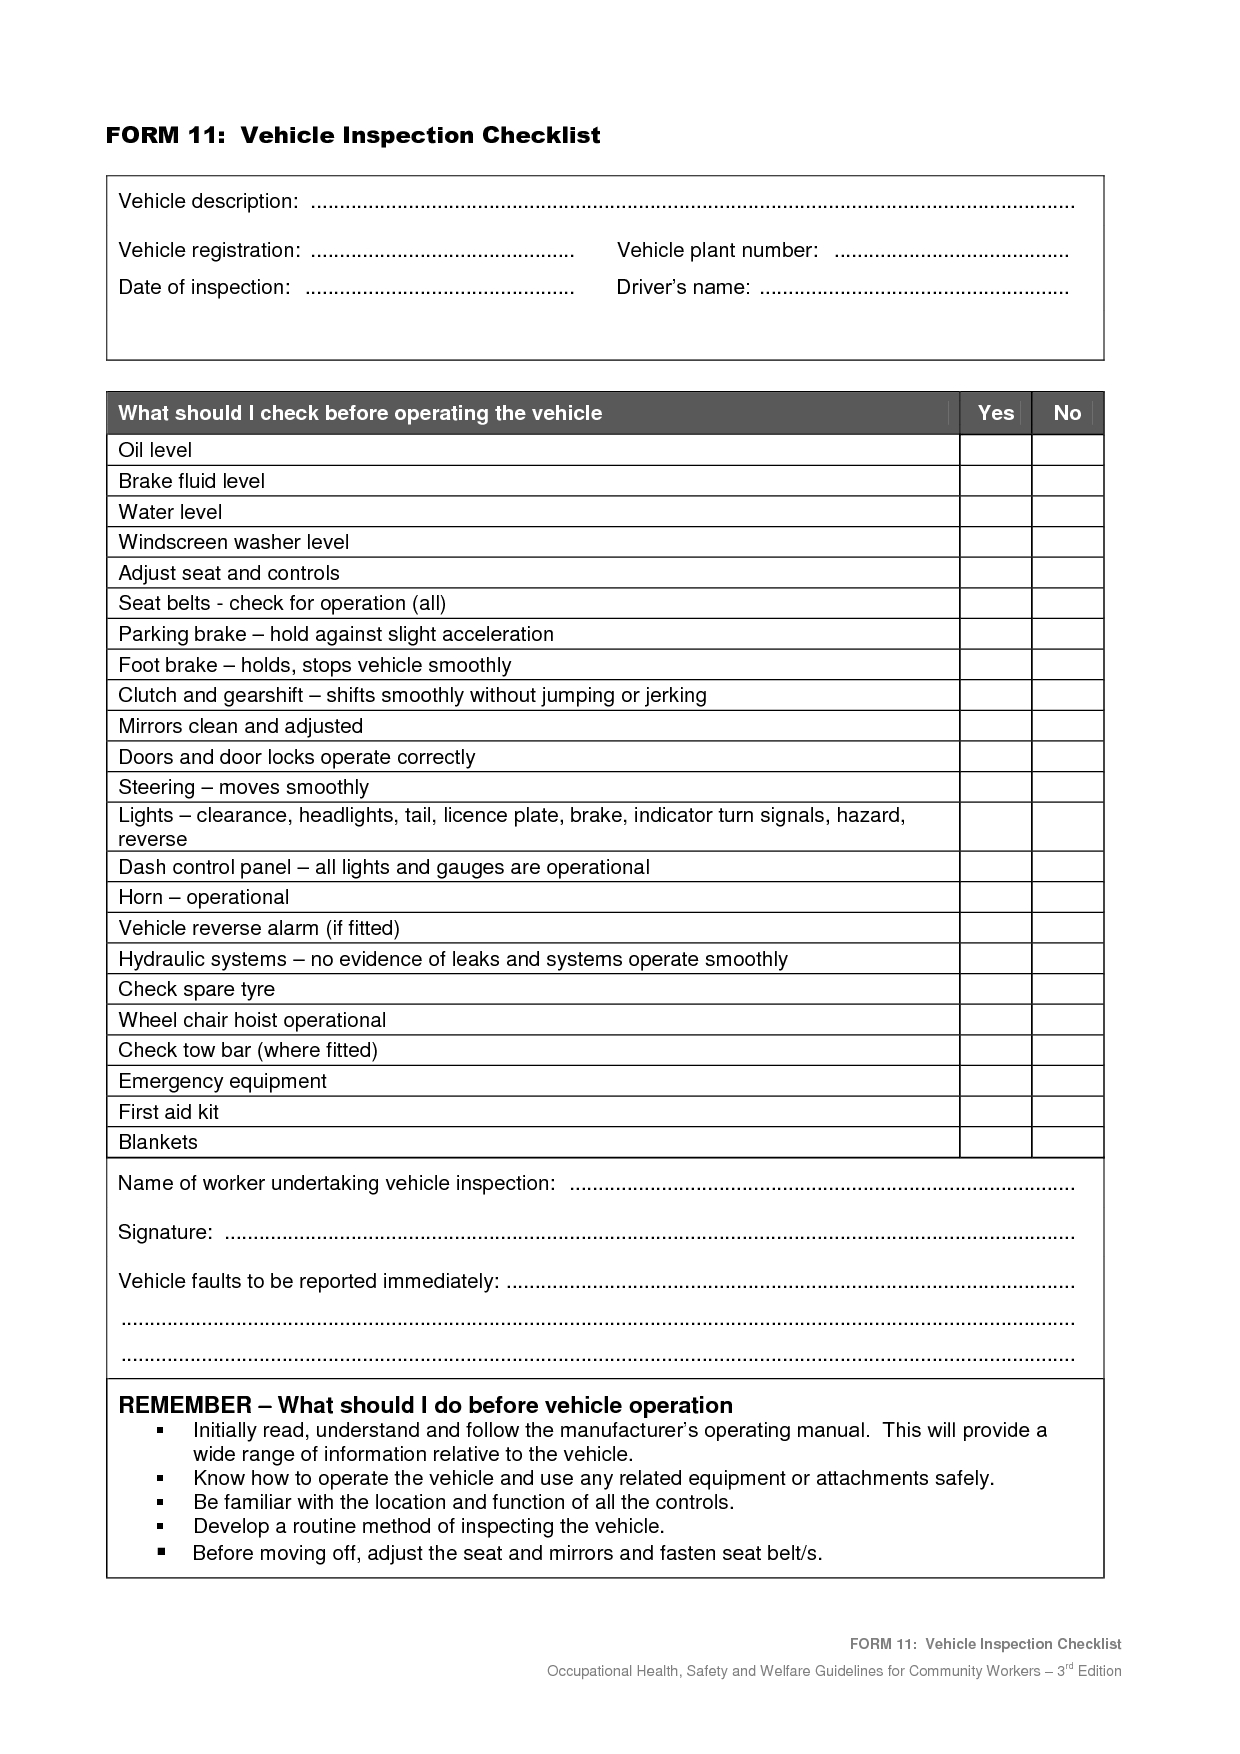 Vehicle+Safety+Inspection+Checklist+Form | Vehicle | Vehicle In Annual Health And Safety Report Template